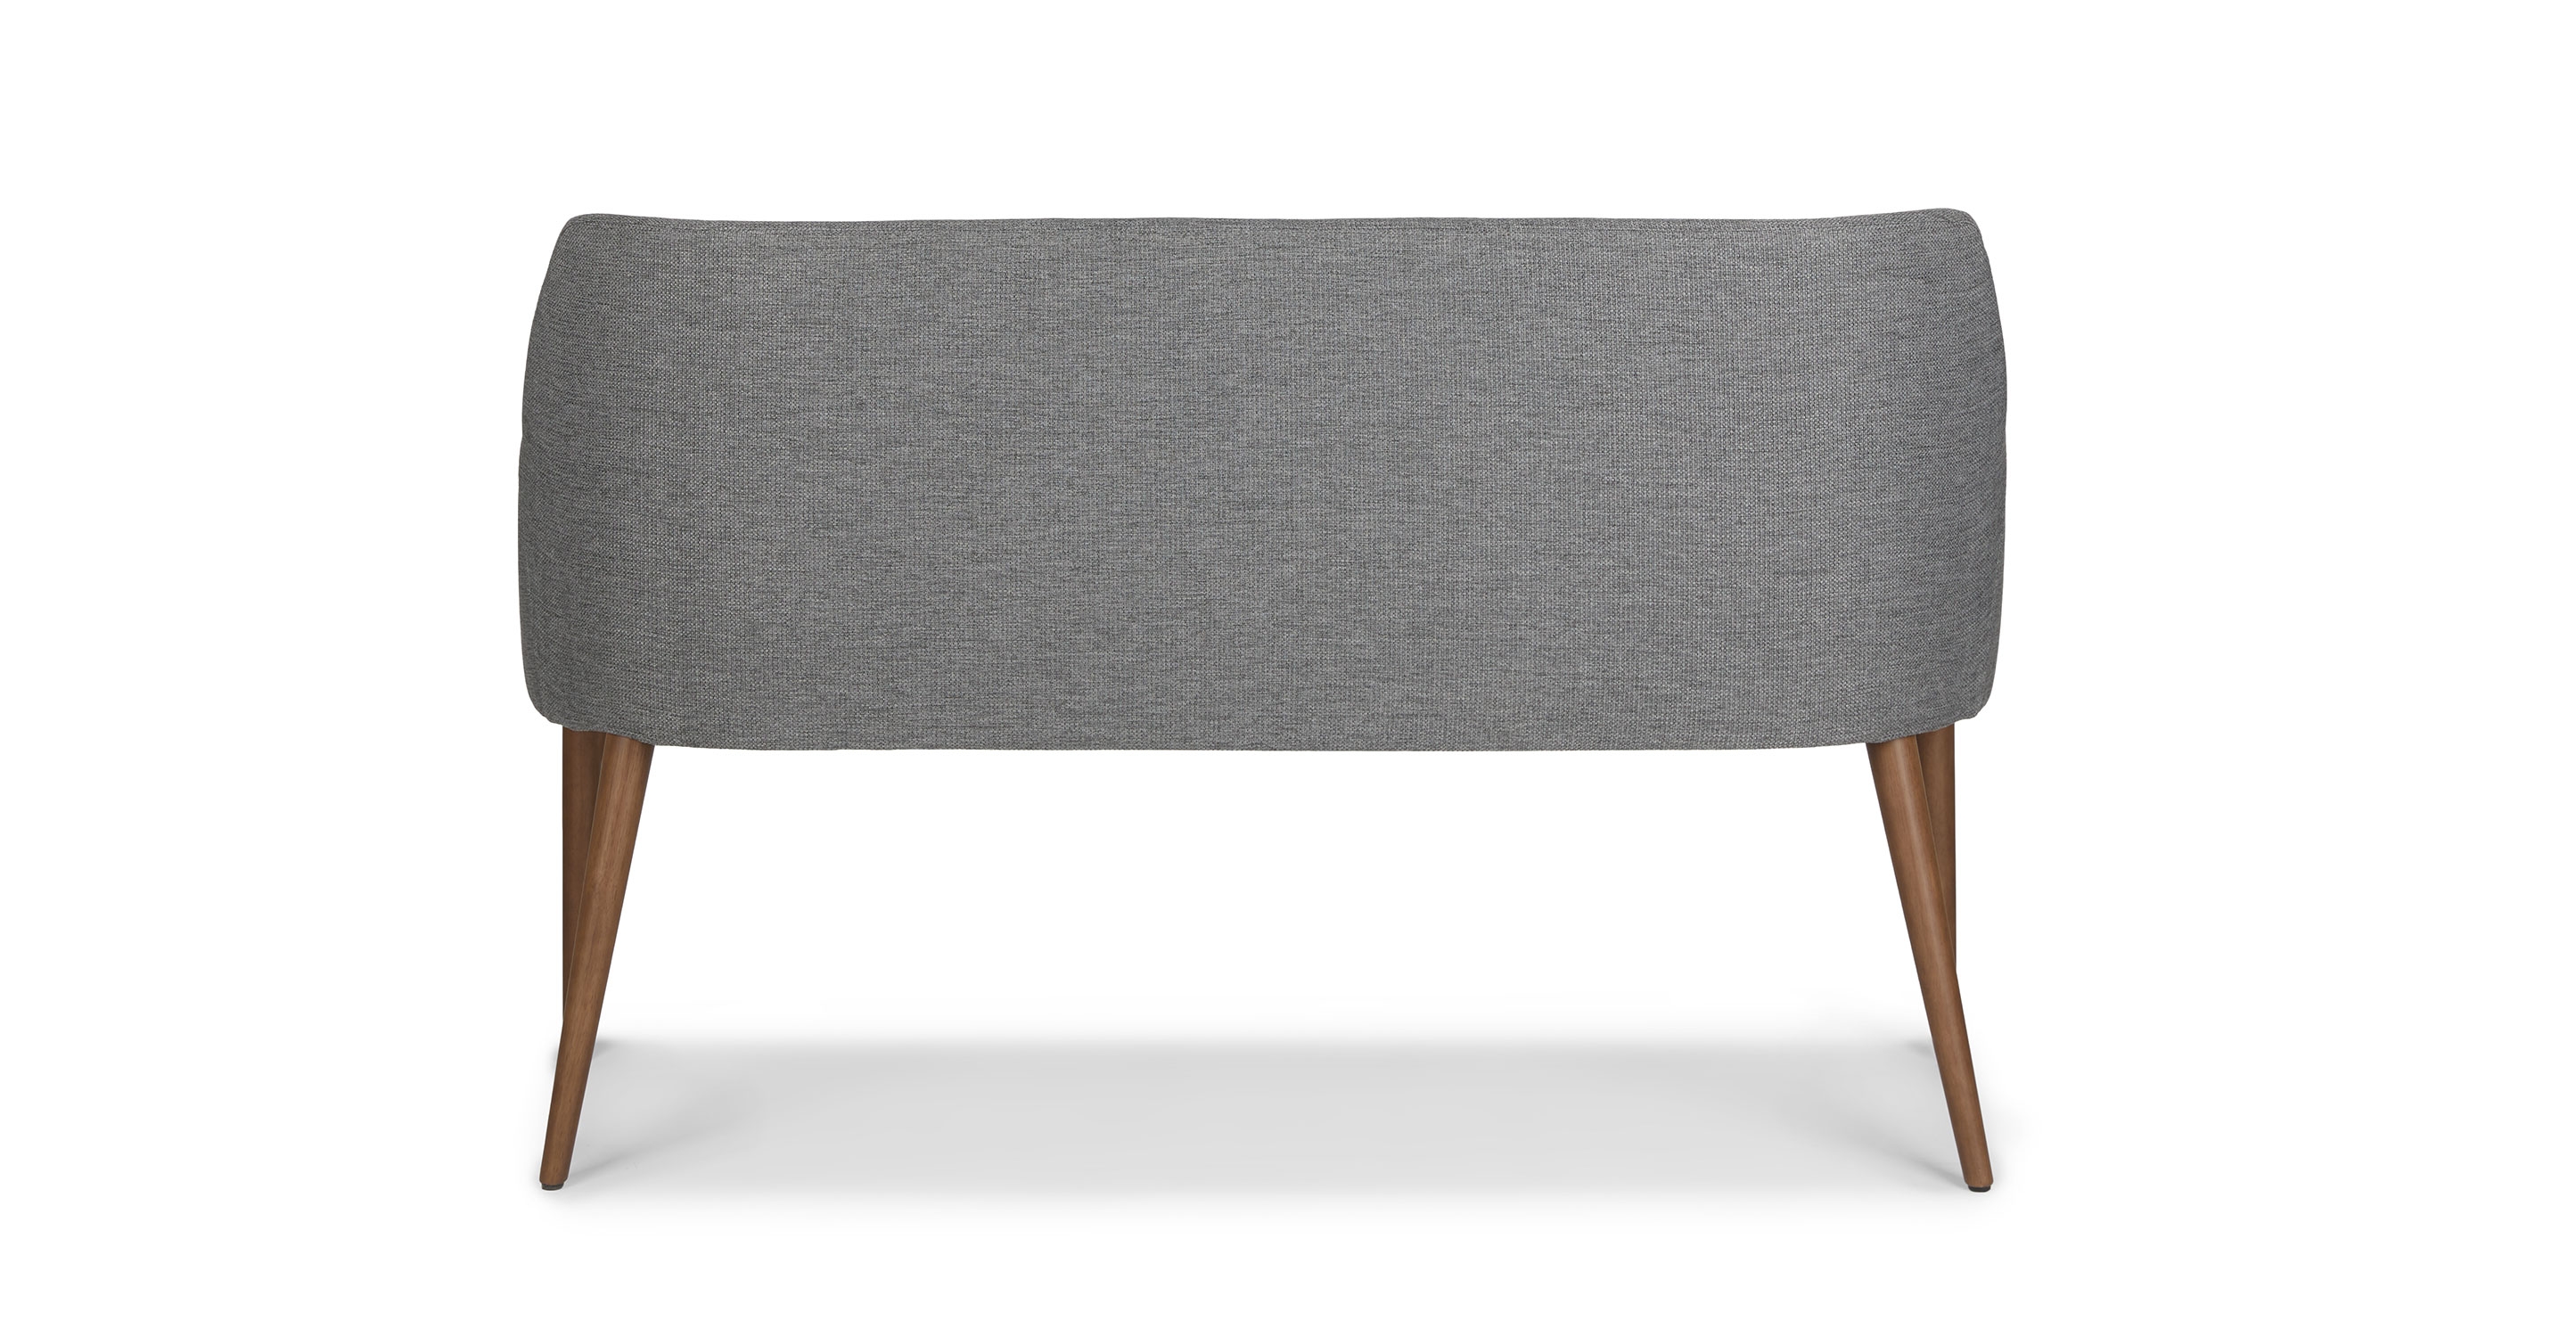 Feast Gravel Gray Dining Bench - Image 3